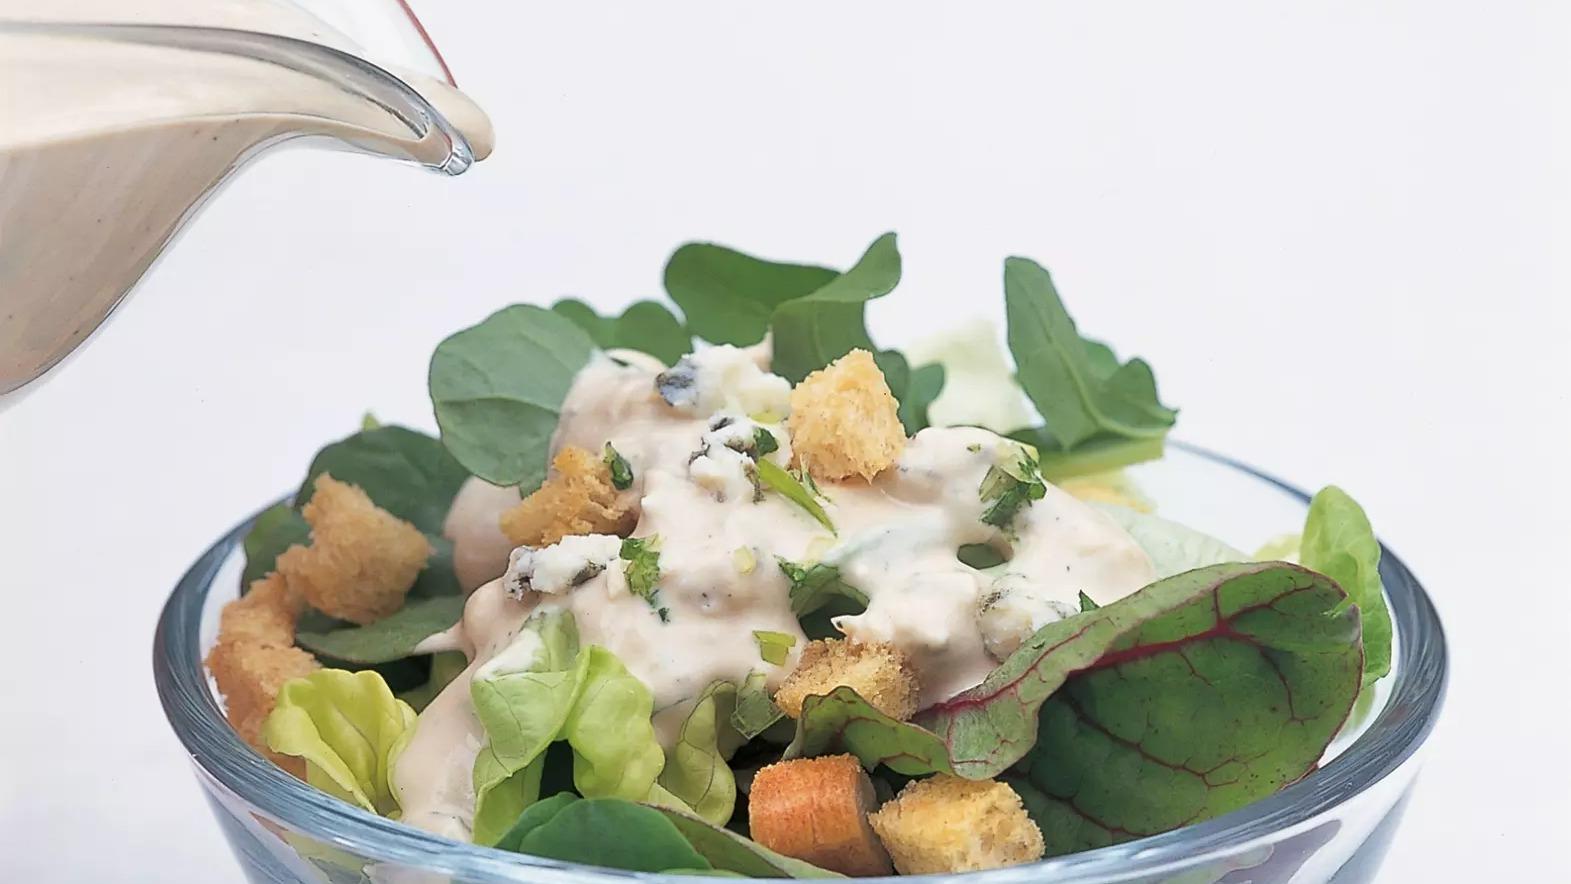 American Blue-cheese Dressing | Recipes | Delia Online